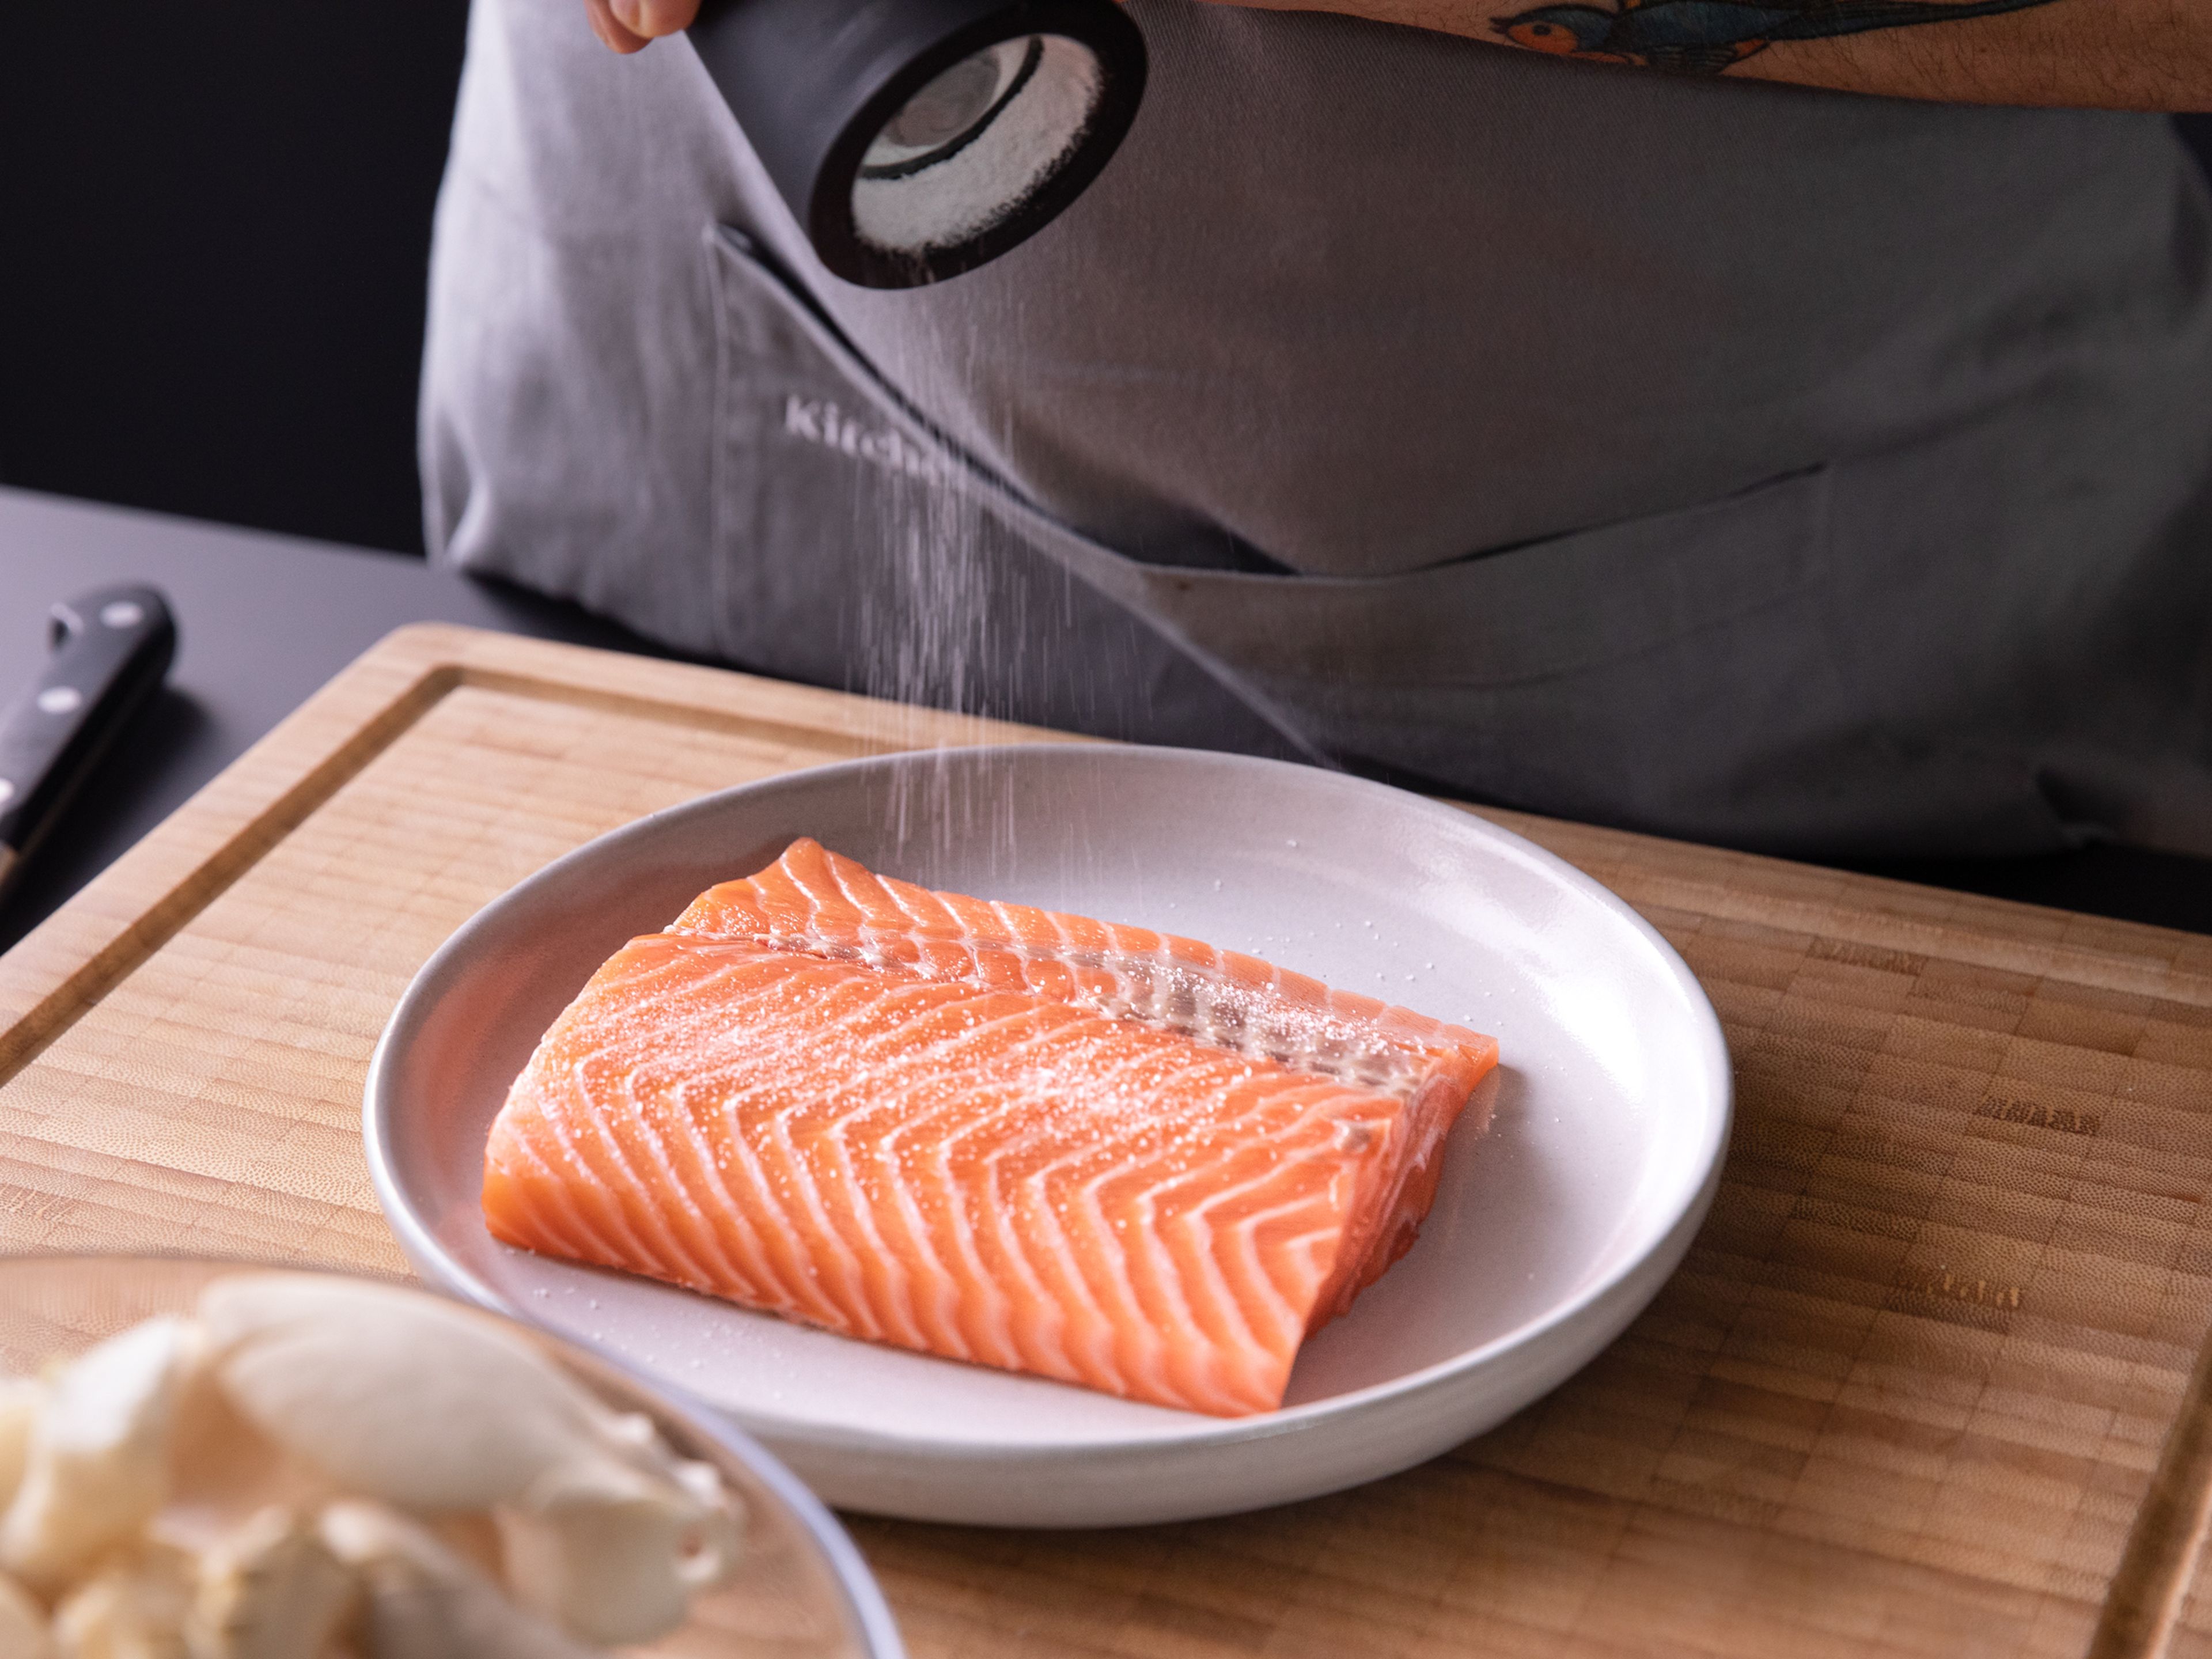 Dab salmon dry with paper towels and season with salt and pepper. Cut the puff pastry sheets into two squares and place on a parchment-lined baking sheet. Separate the egg yolk from the egg white and set aside.